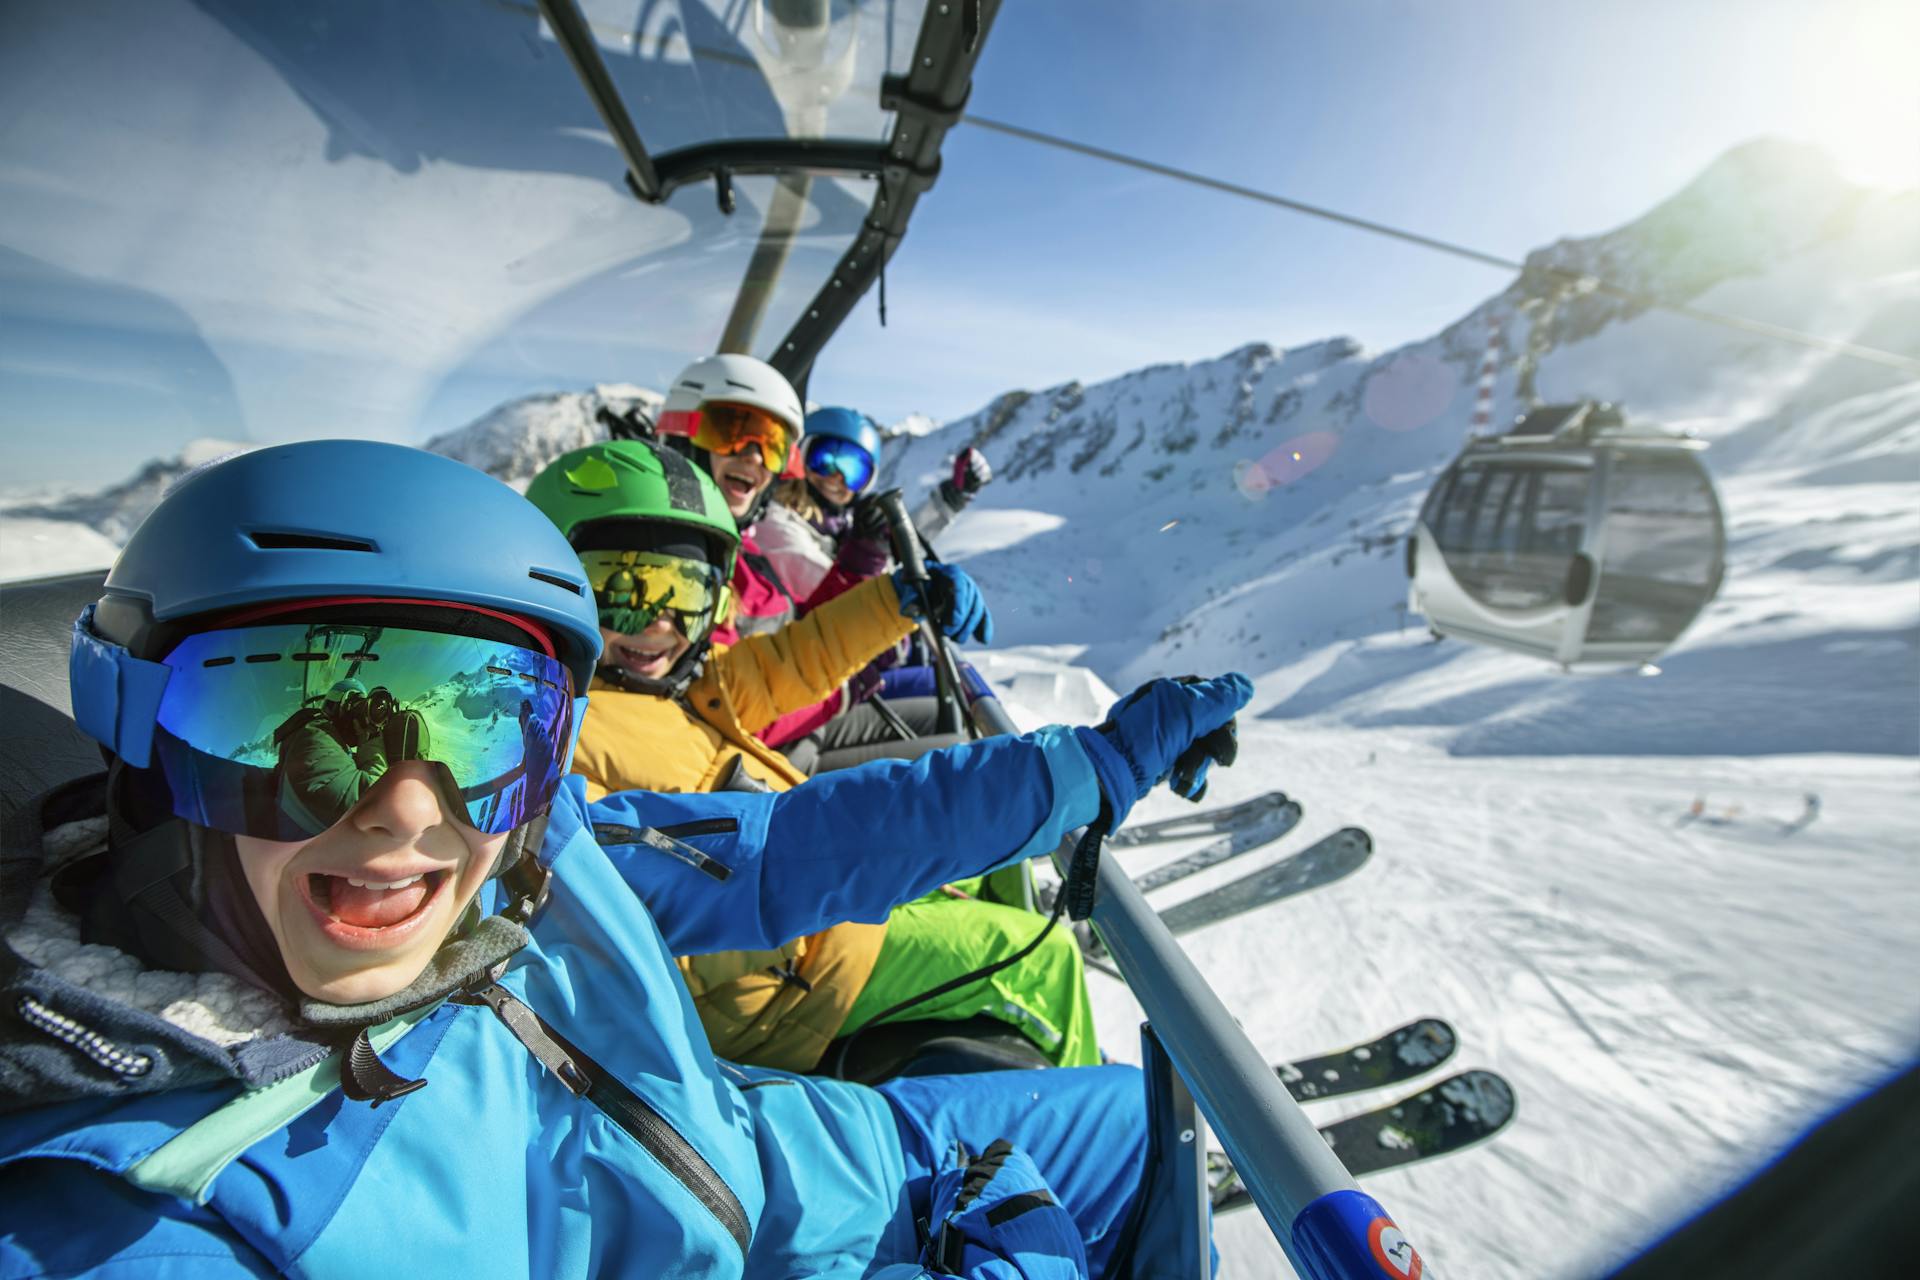 young family of skiers taking selfie on chairlift at ski resort